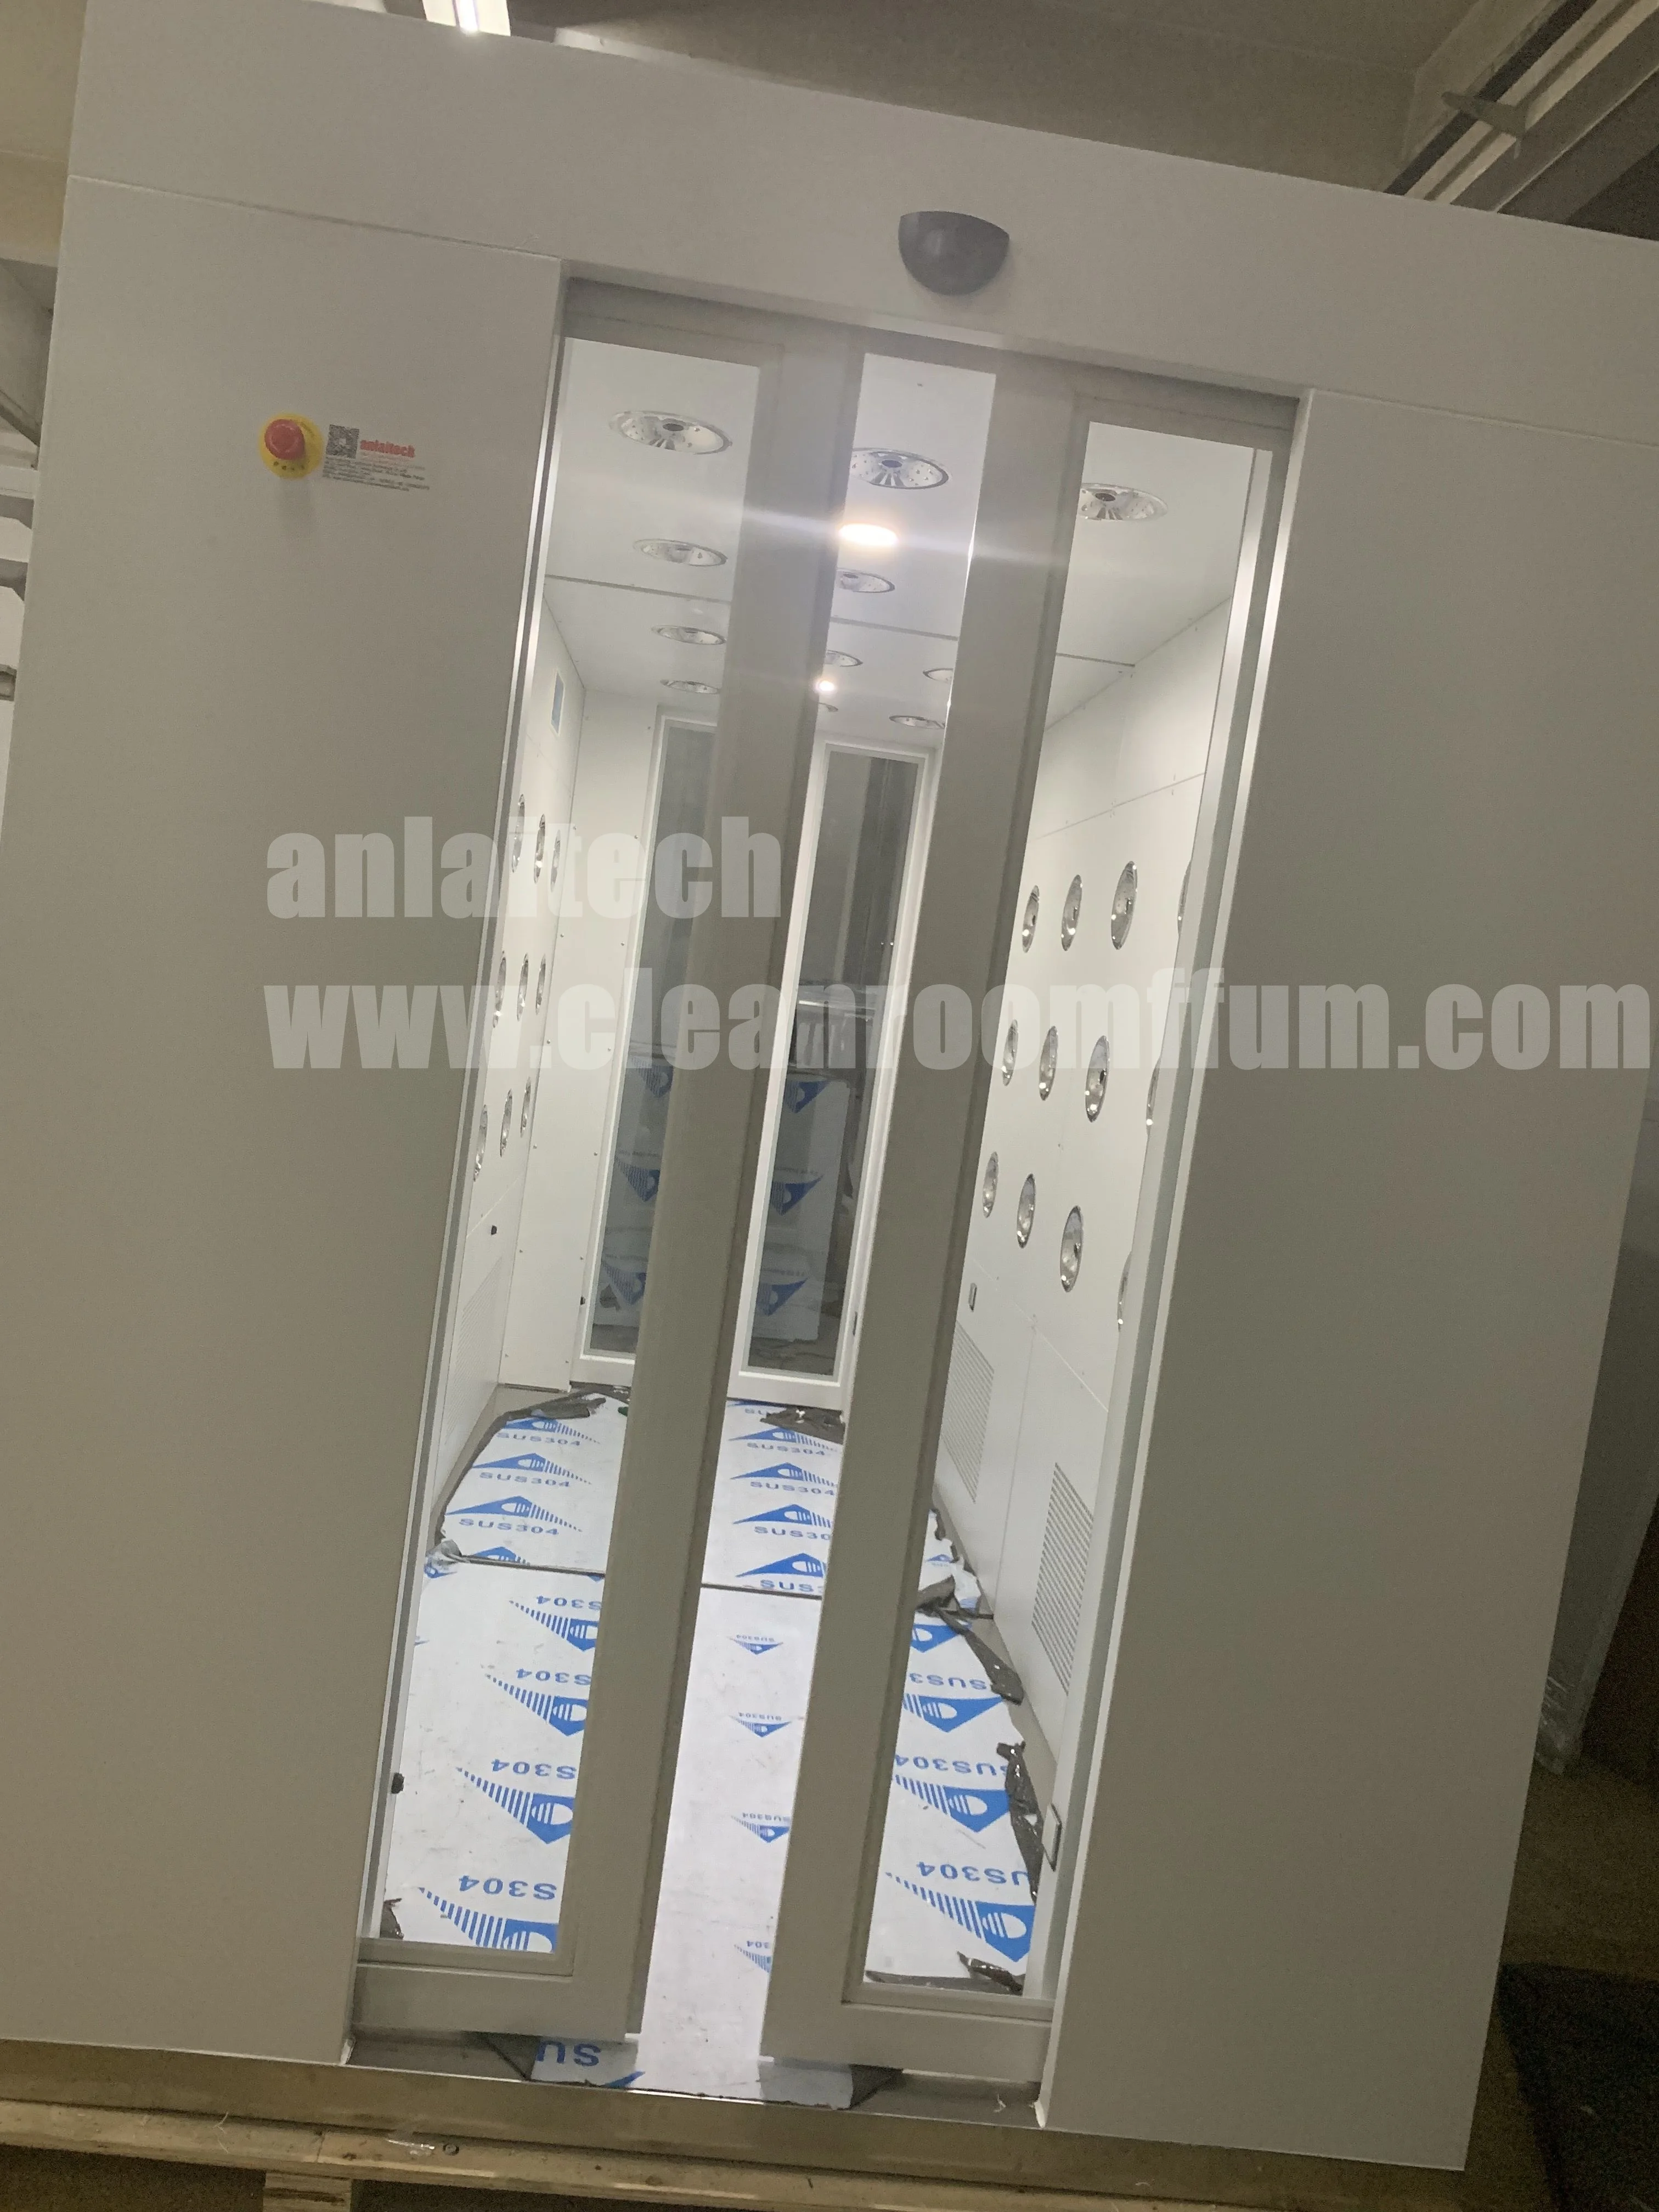 
Automatic sliding door clean room Air Shower, personal air shower room 